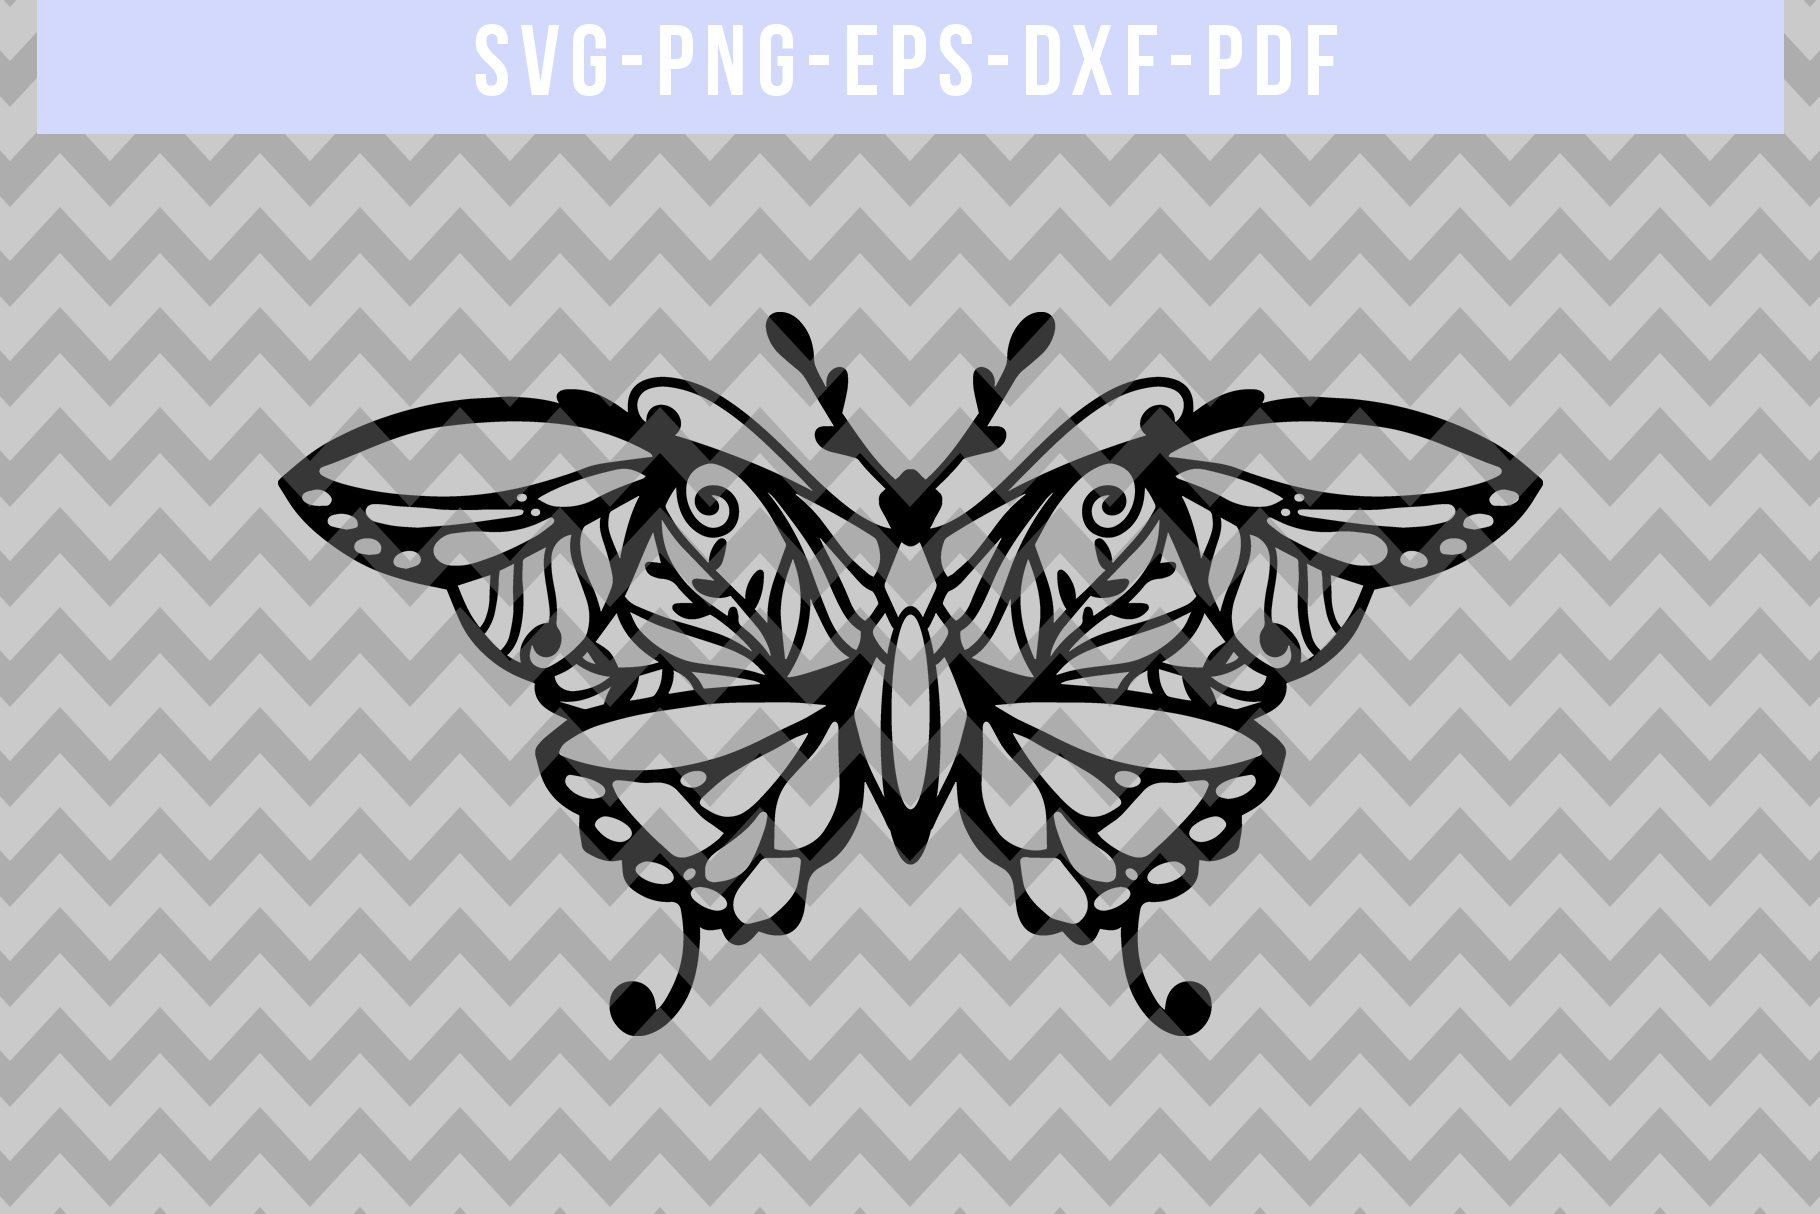 Download Butterfly Papercut Template, Spring Clip Art SVG, DXF, PDF ...